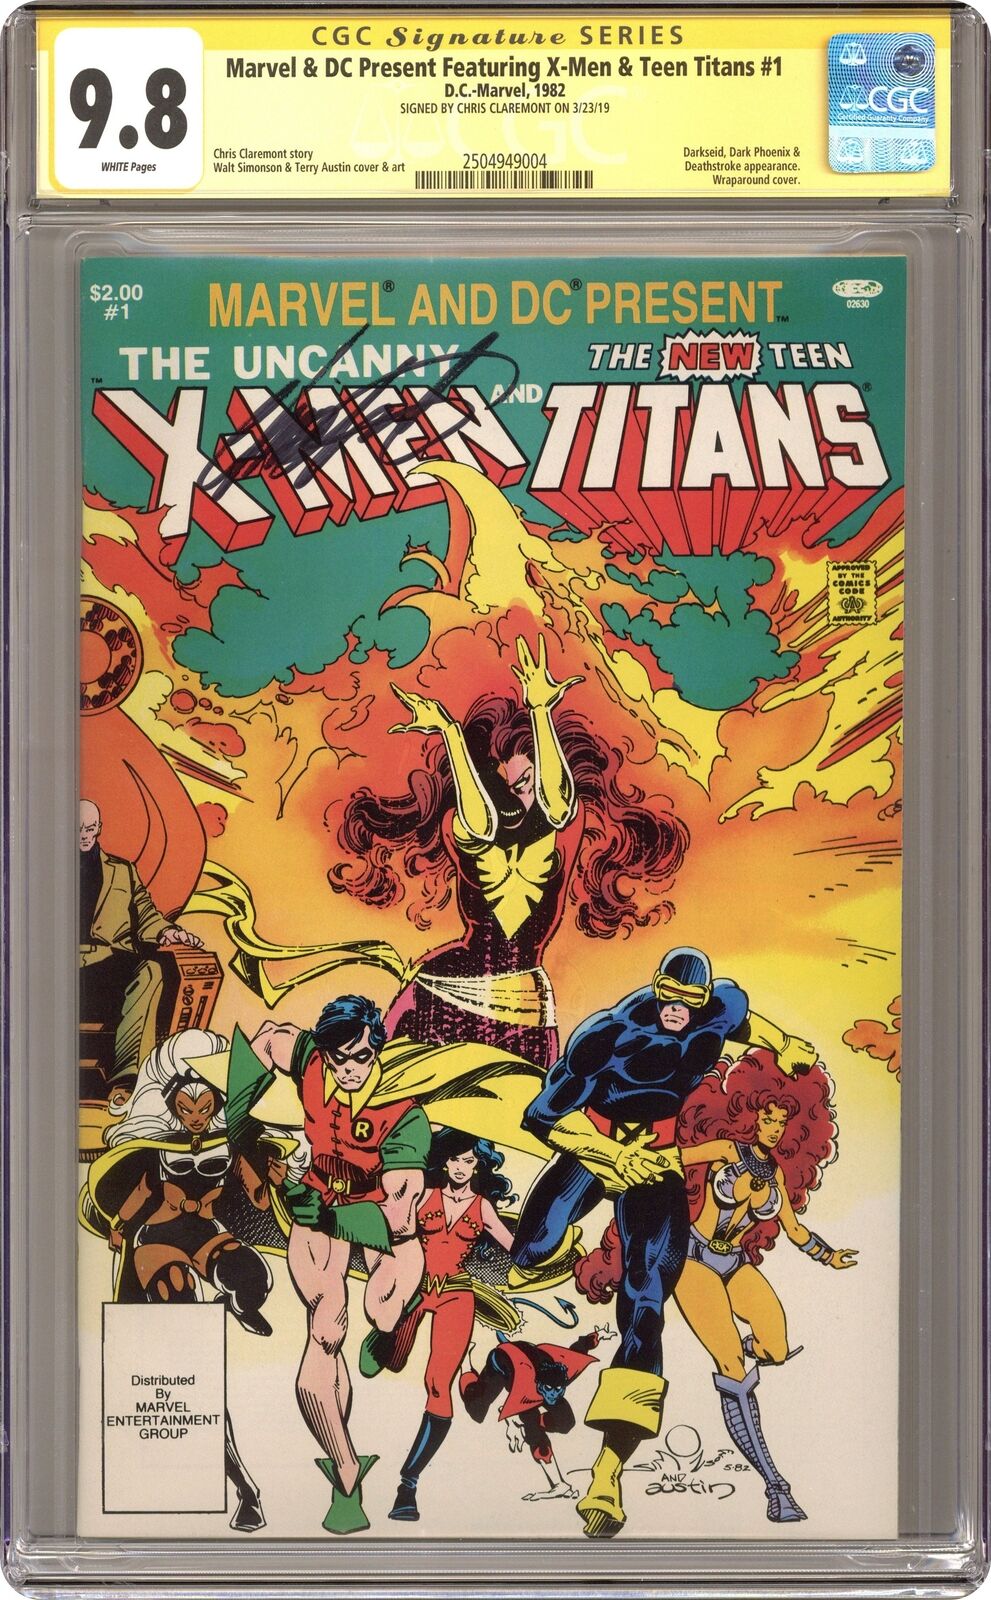 Marvel and DC Present Uncanny X-Men and the New Teen Titans #1 CGC 9.8 SS 1982